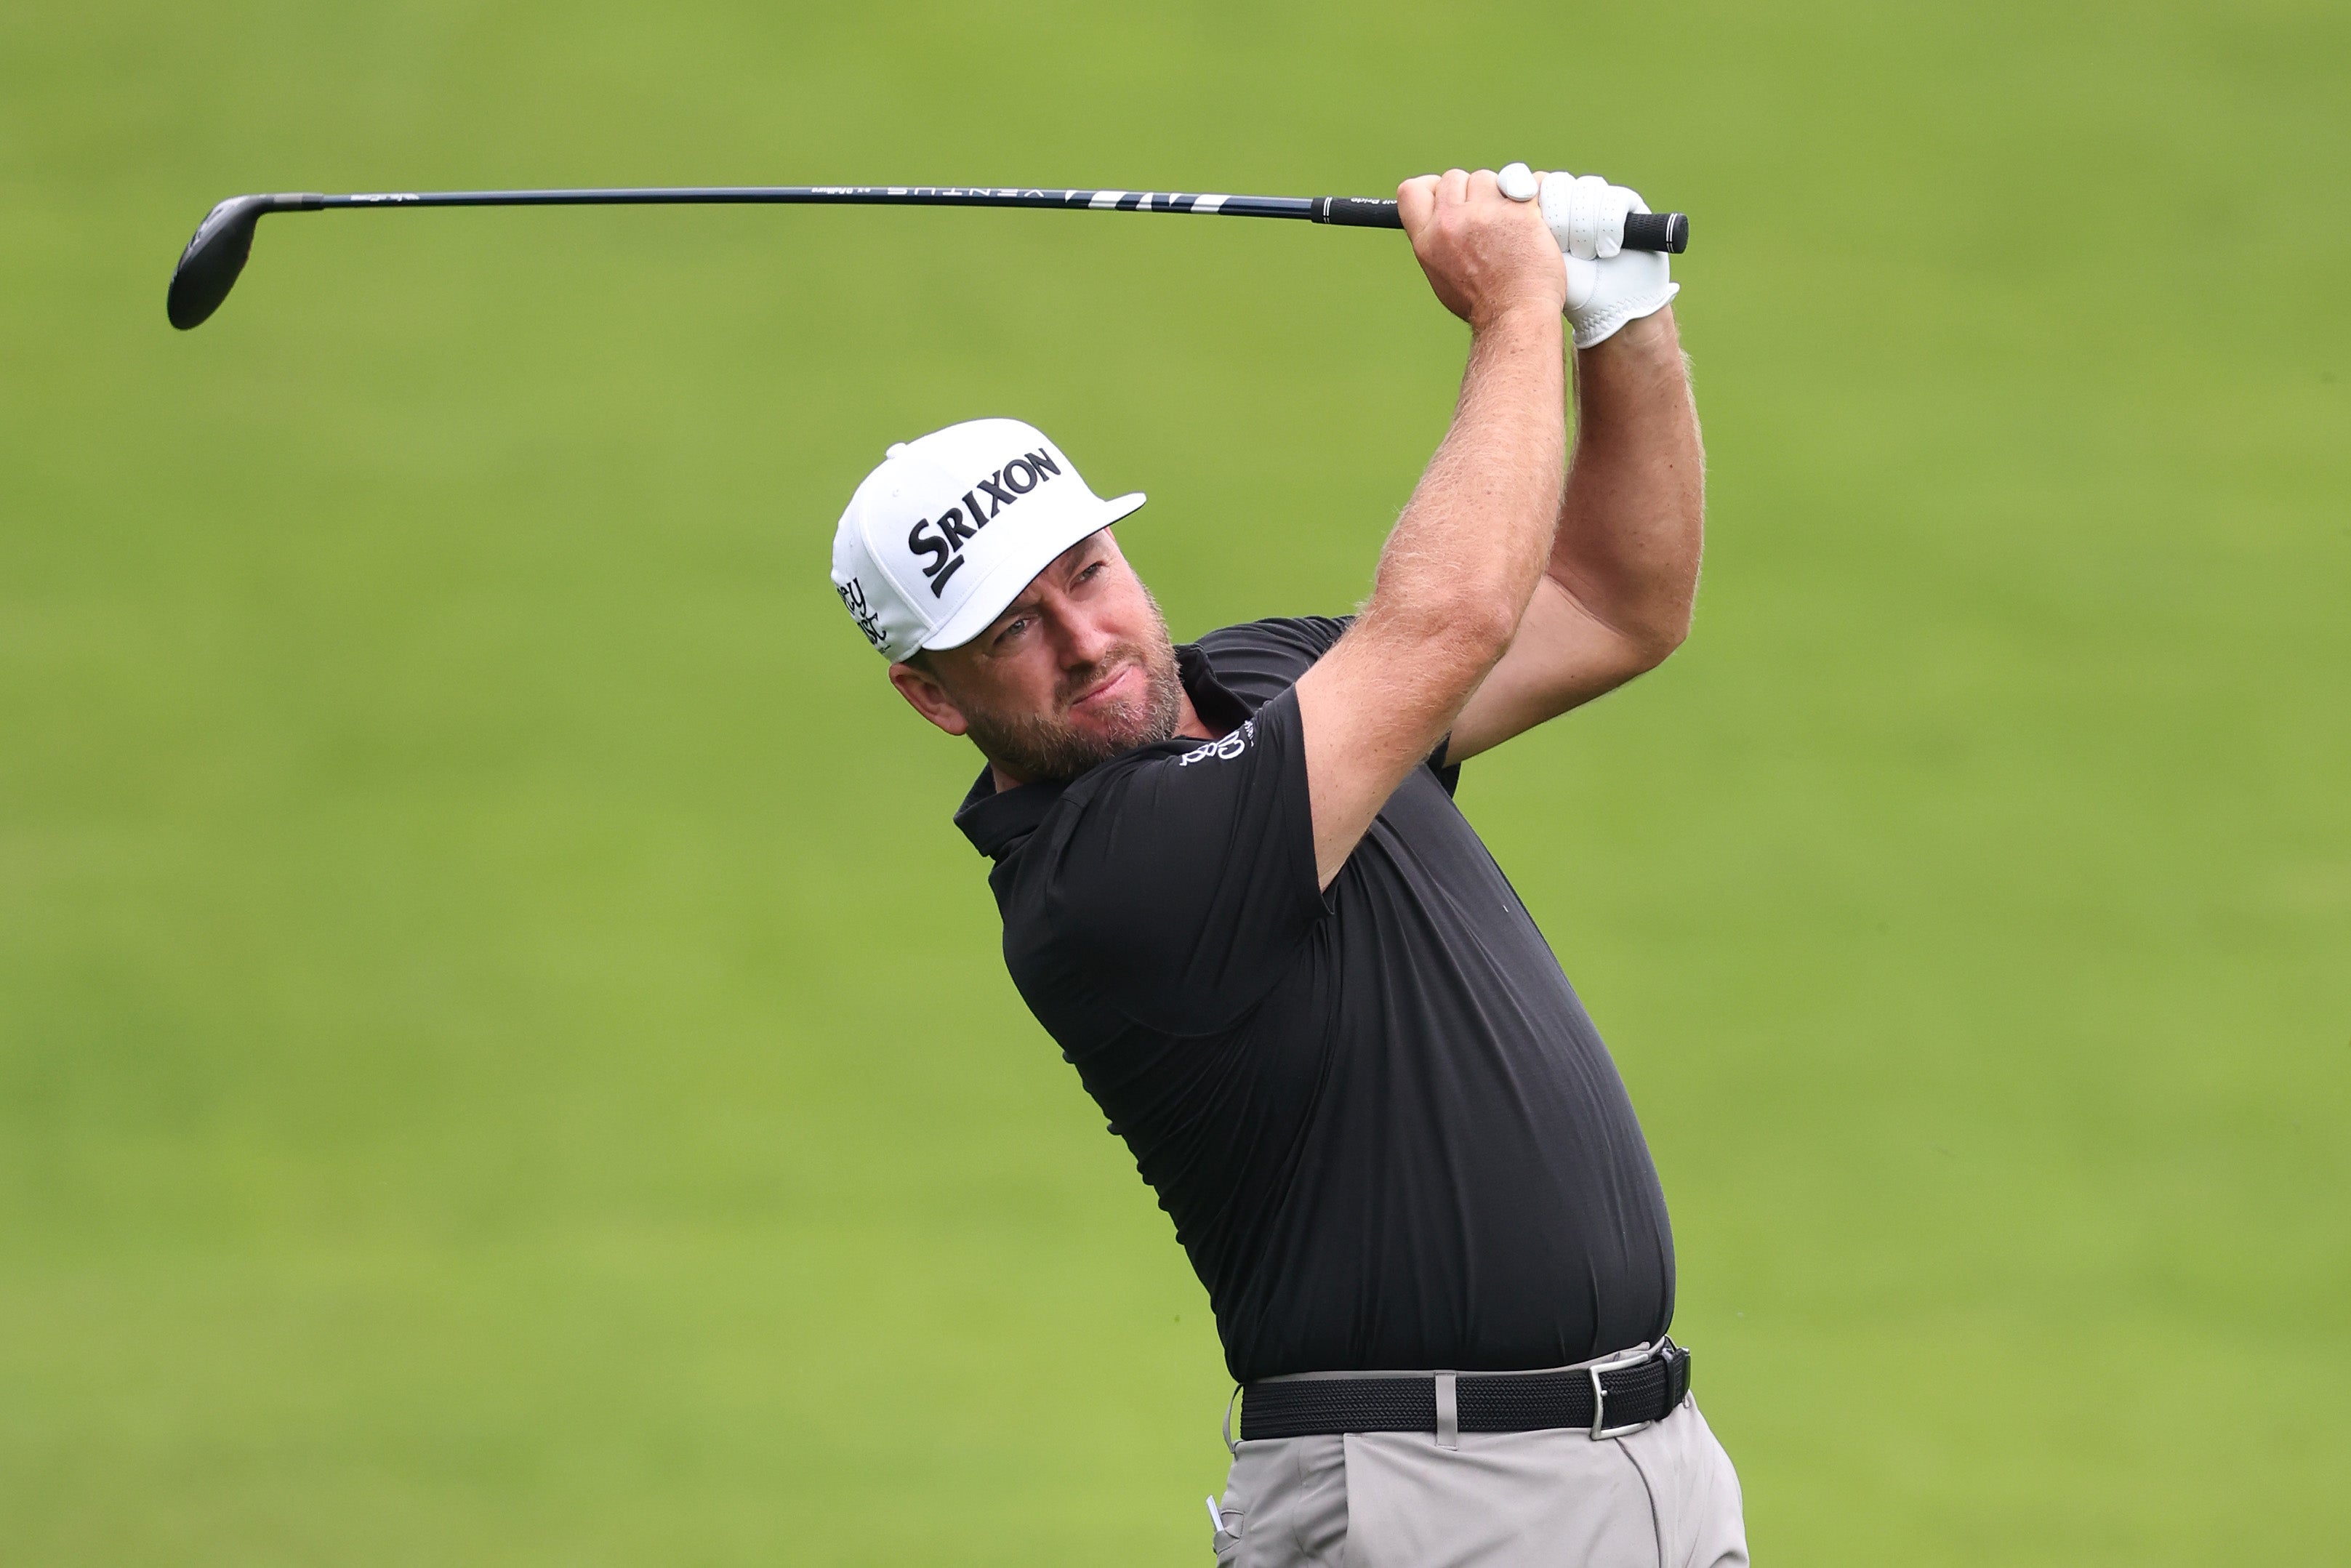 McDowell is one of 18 players from the Saudi-funded breakaway competing at Wentworth